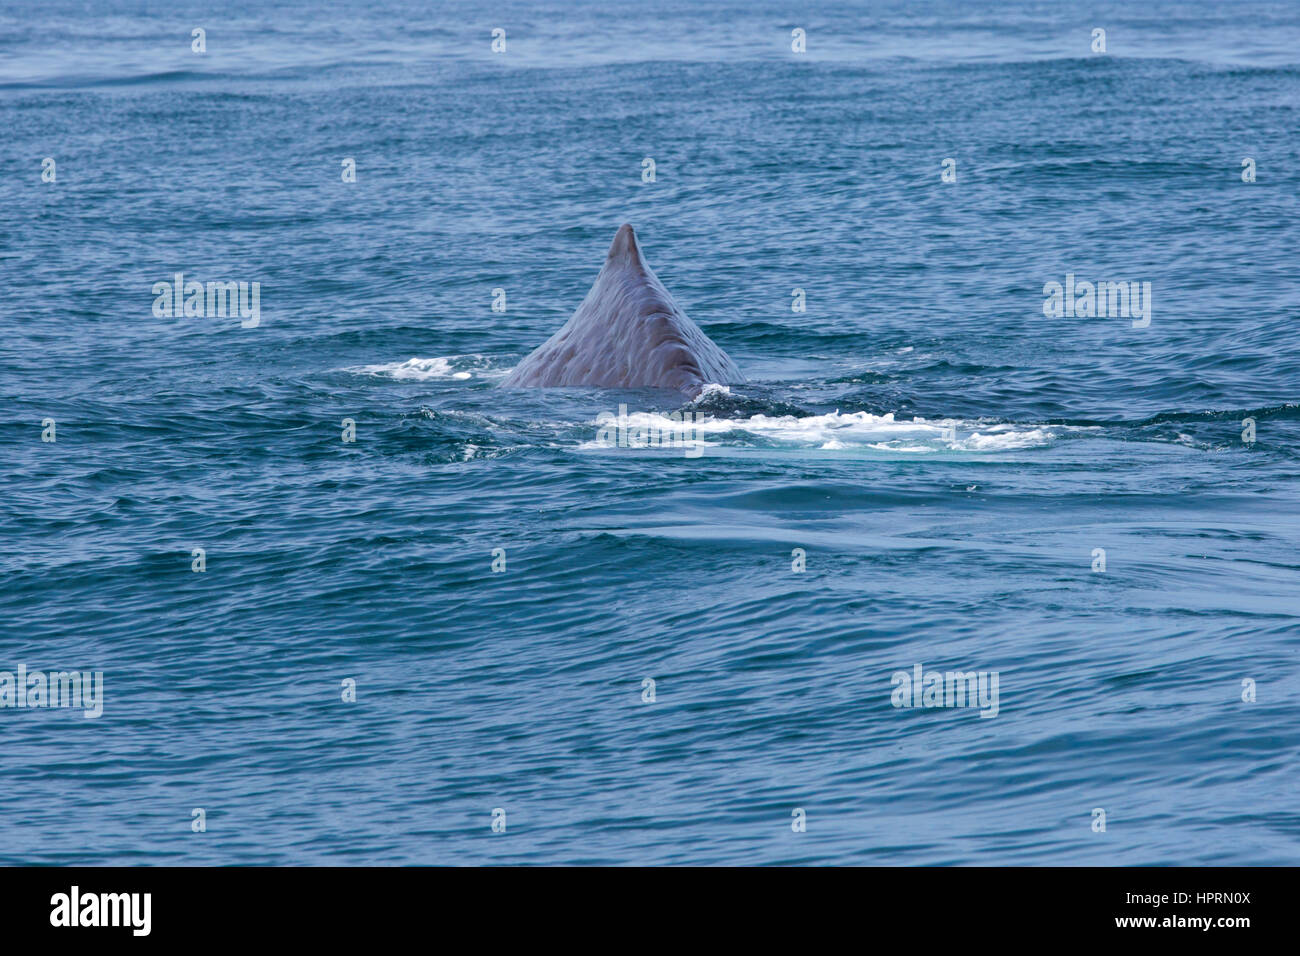 Kaikoura, Canterbury, New Zealand. The ridged back of a sperm whale (Physeter macrocephalus) visible above the ocean surface. Stock Photo